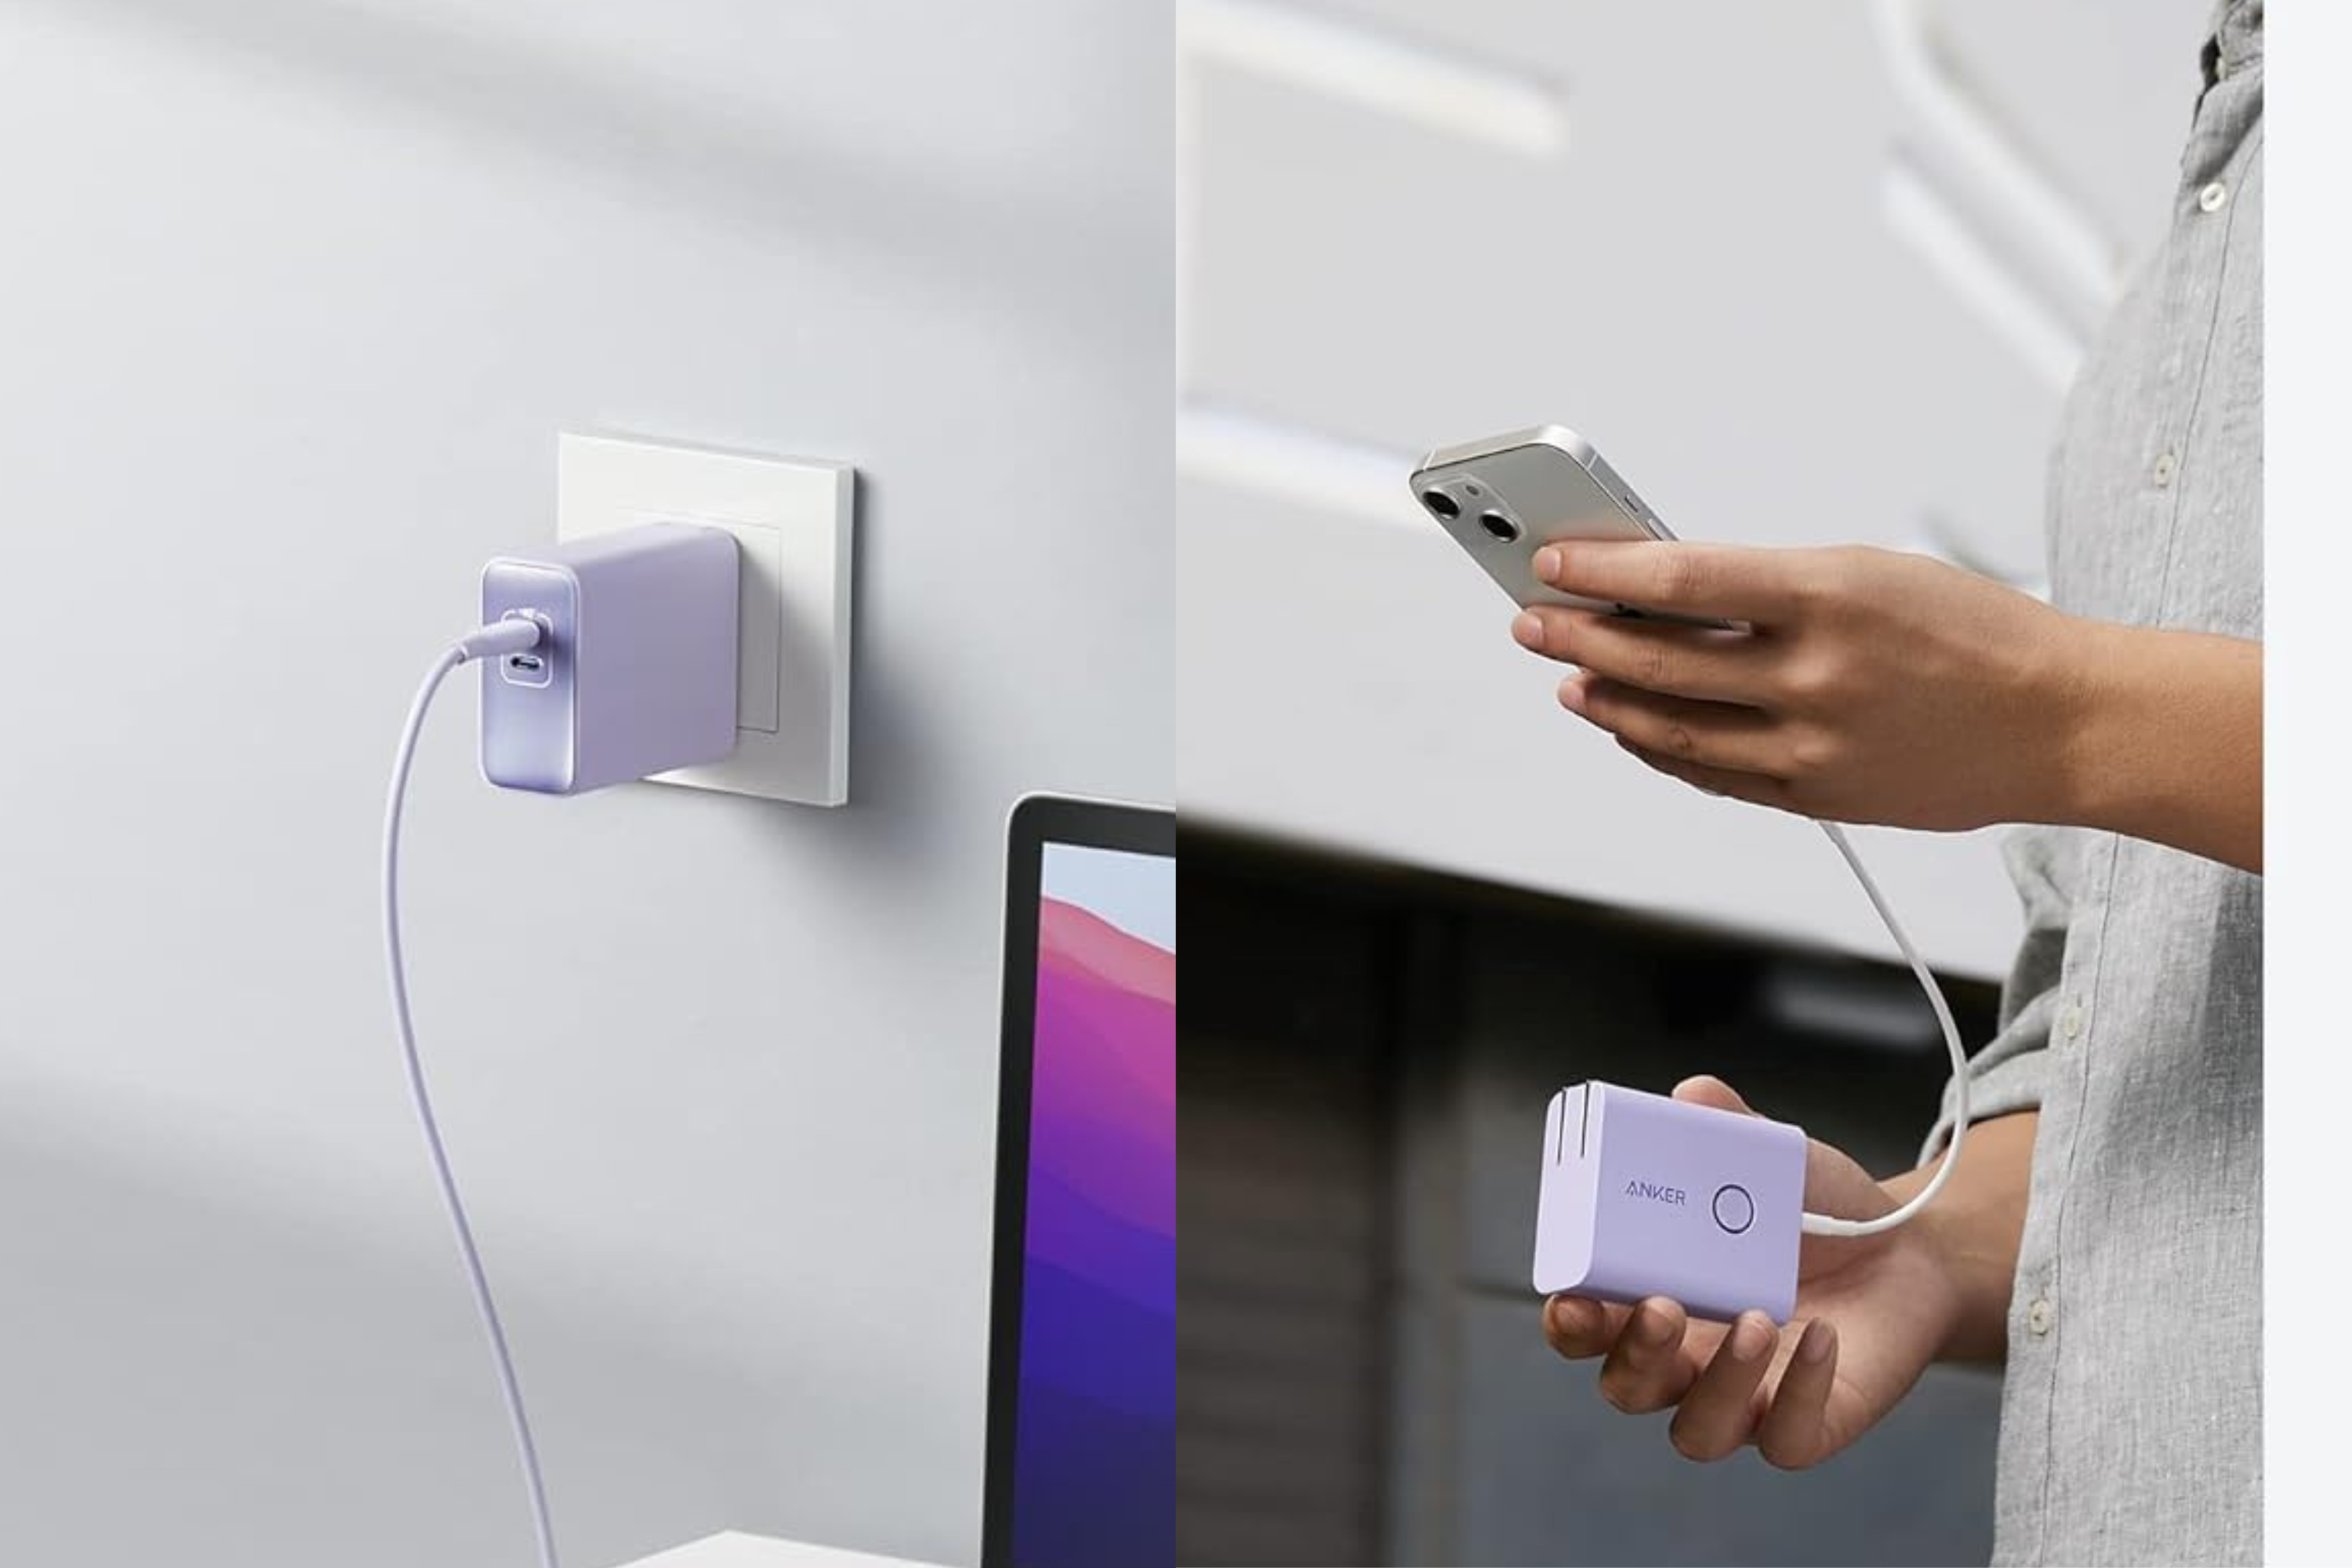 Anker 45W Wall Charger with 5,000 mAh 20W Portable Charger in wall and in hand